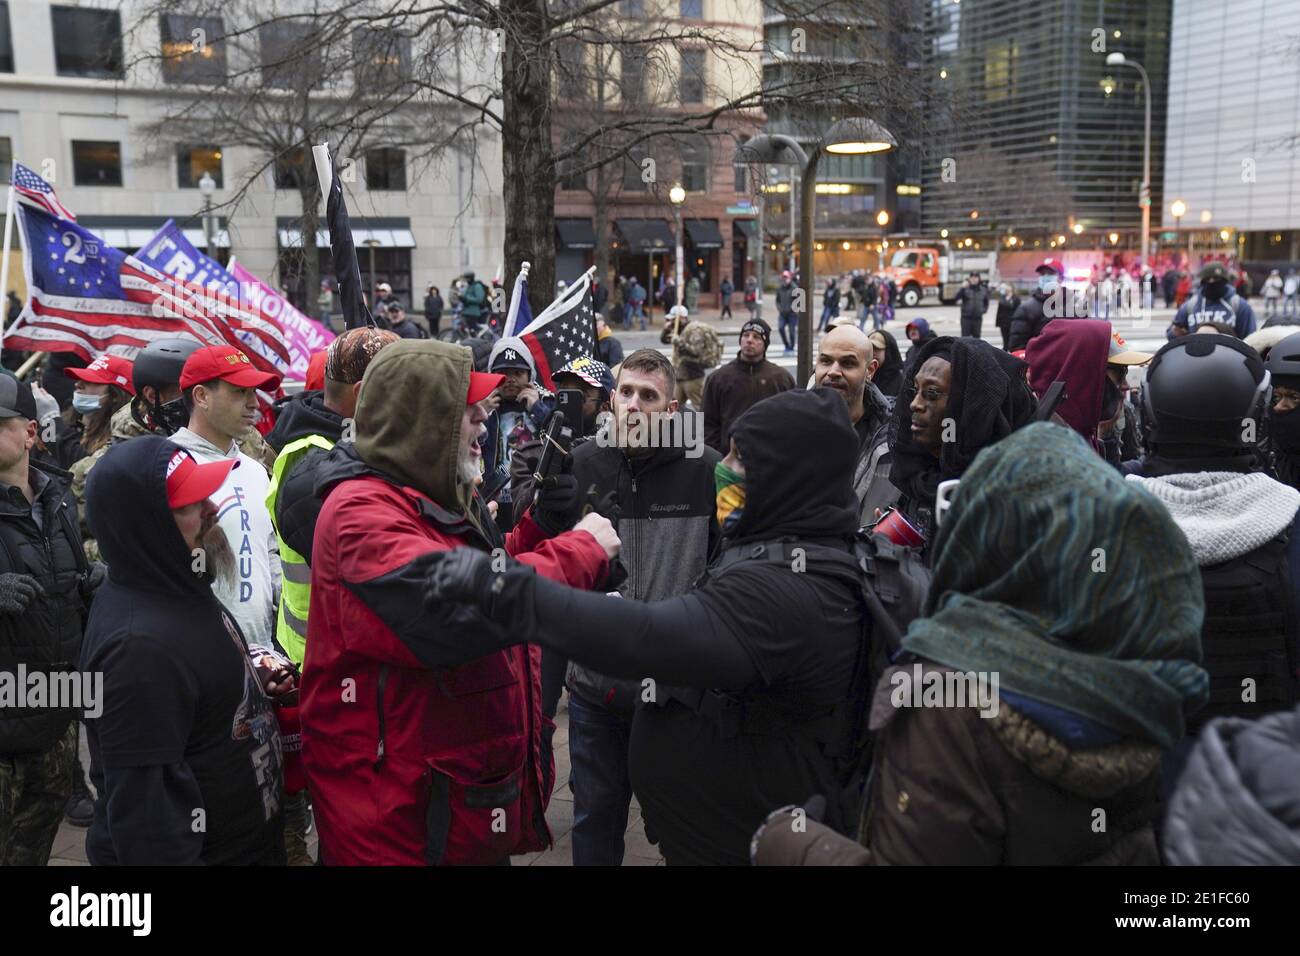 Washington, United States. 06th Jan, 2021. Pro-Trump supporters gather and march to protest against the Electoral College vote count that would certify President-elect Joe Biden as the winner in Washington, DC on Wednesday, January 6, 2021. Under federal law, Jan. 6 is the date Electoral College votes determining the next president are counted in a joint session of Congress. Photo by Leigh Vogel/UPI Credit: UPI/Alamy Live News Stock Photo